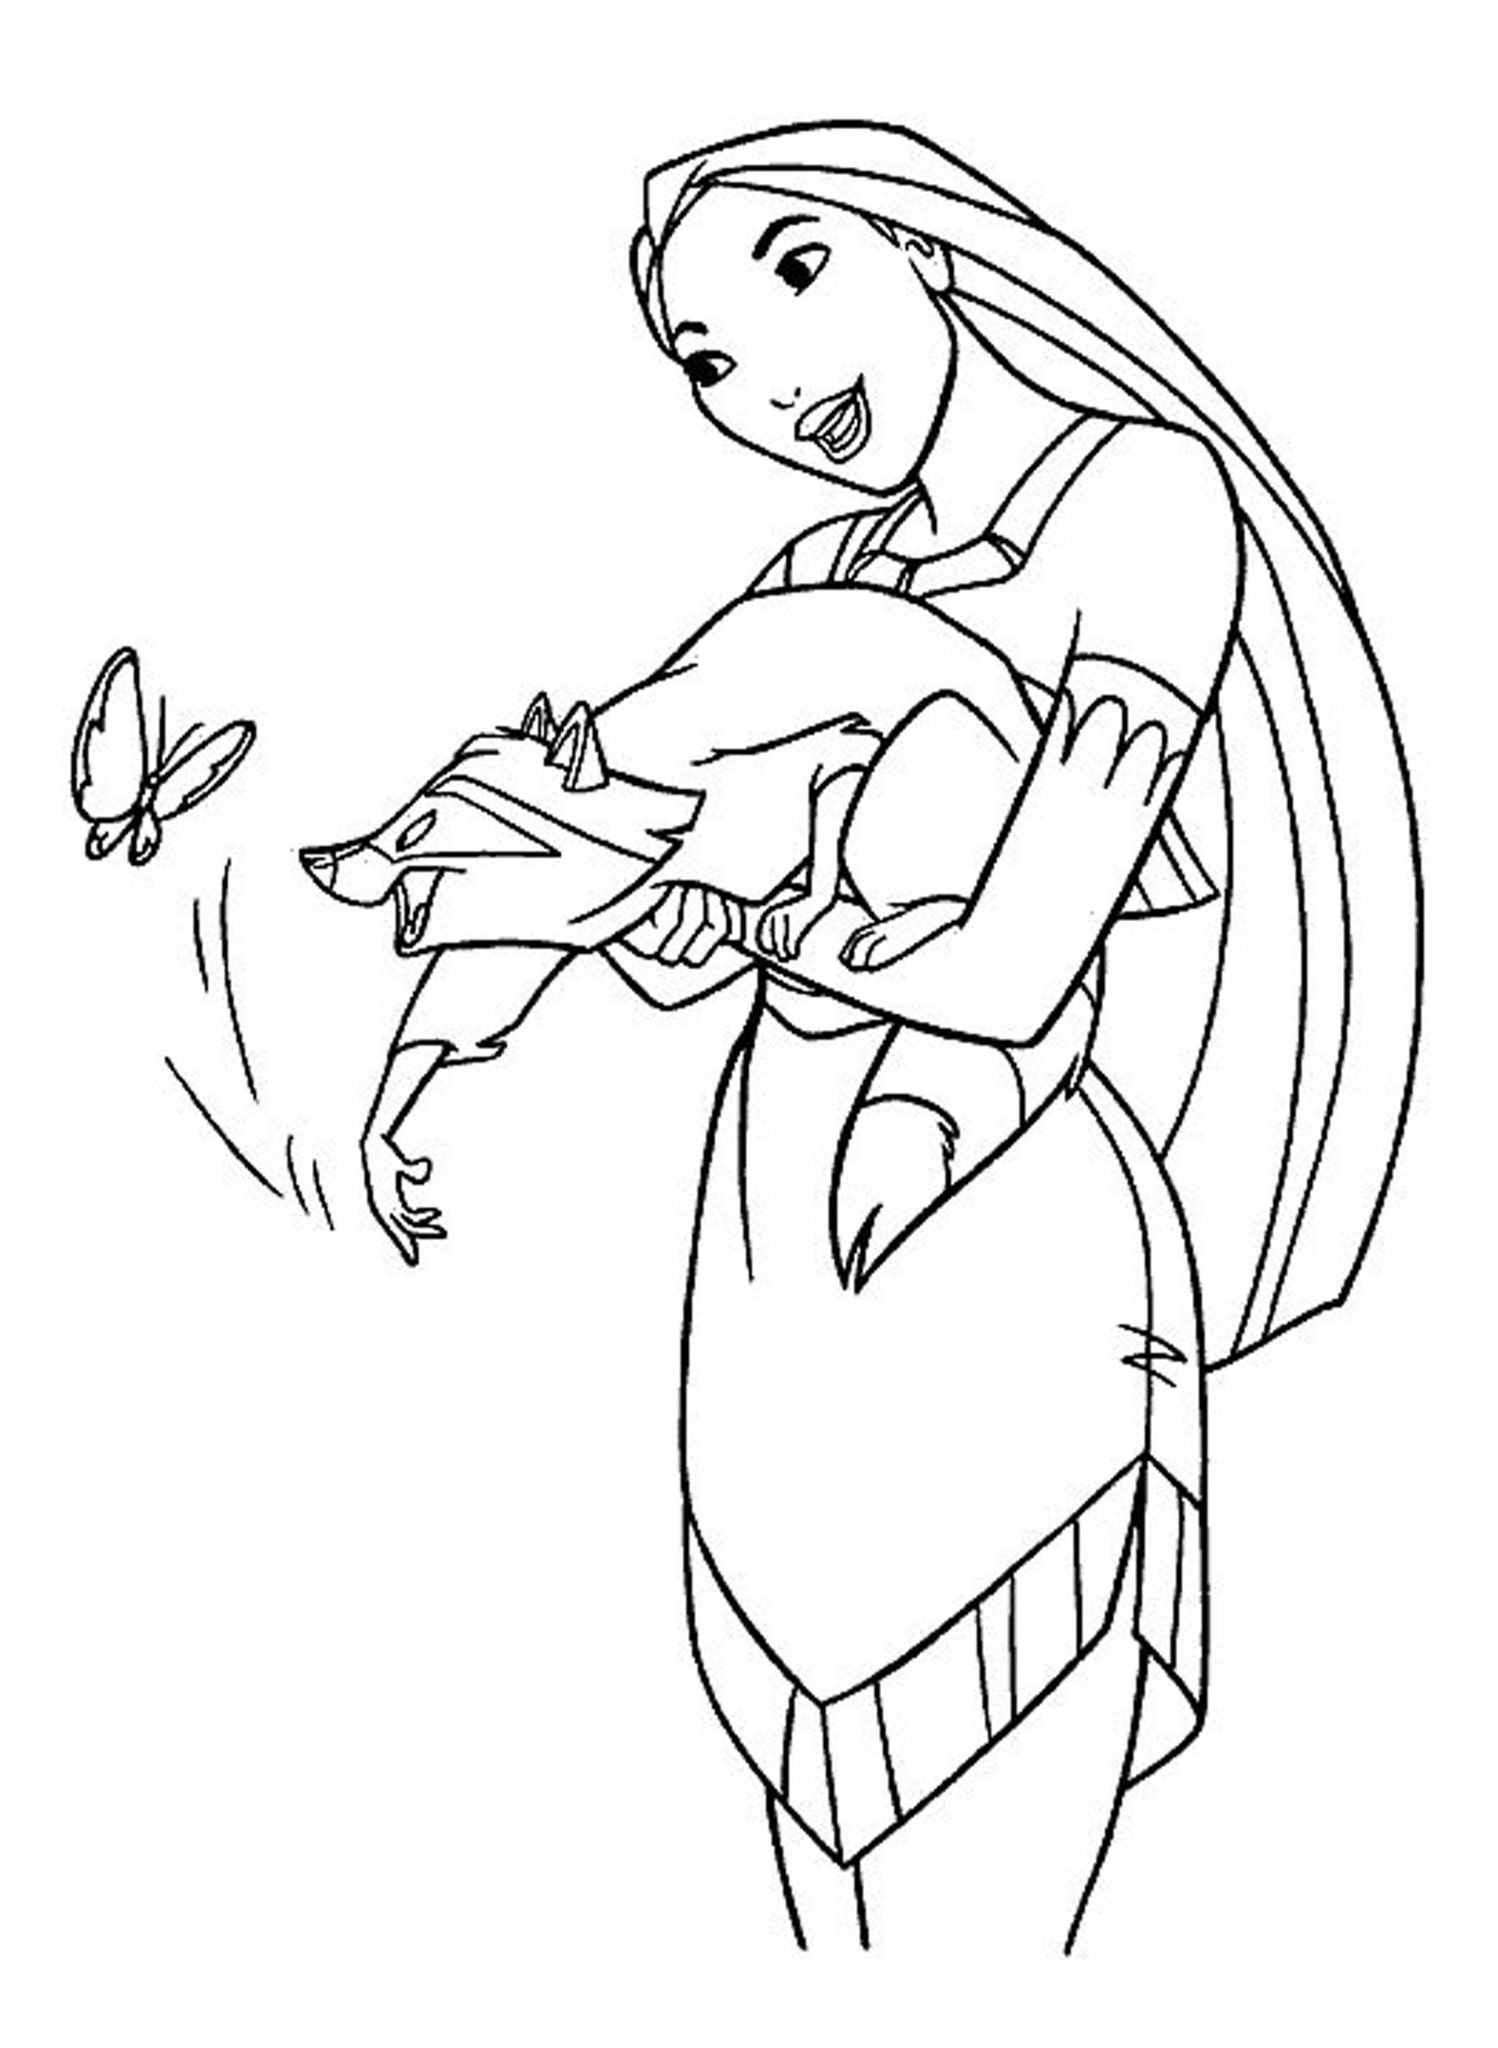 Printable Disney Coloring Pages
 Disney Coloring Pages For Your Children